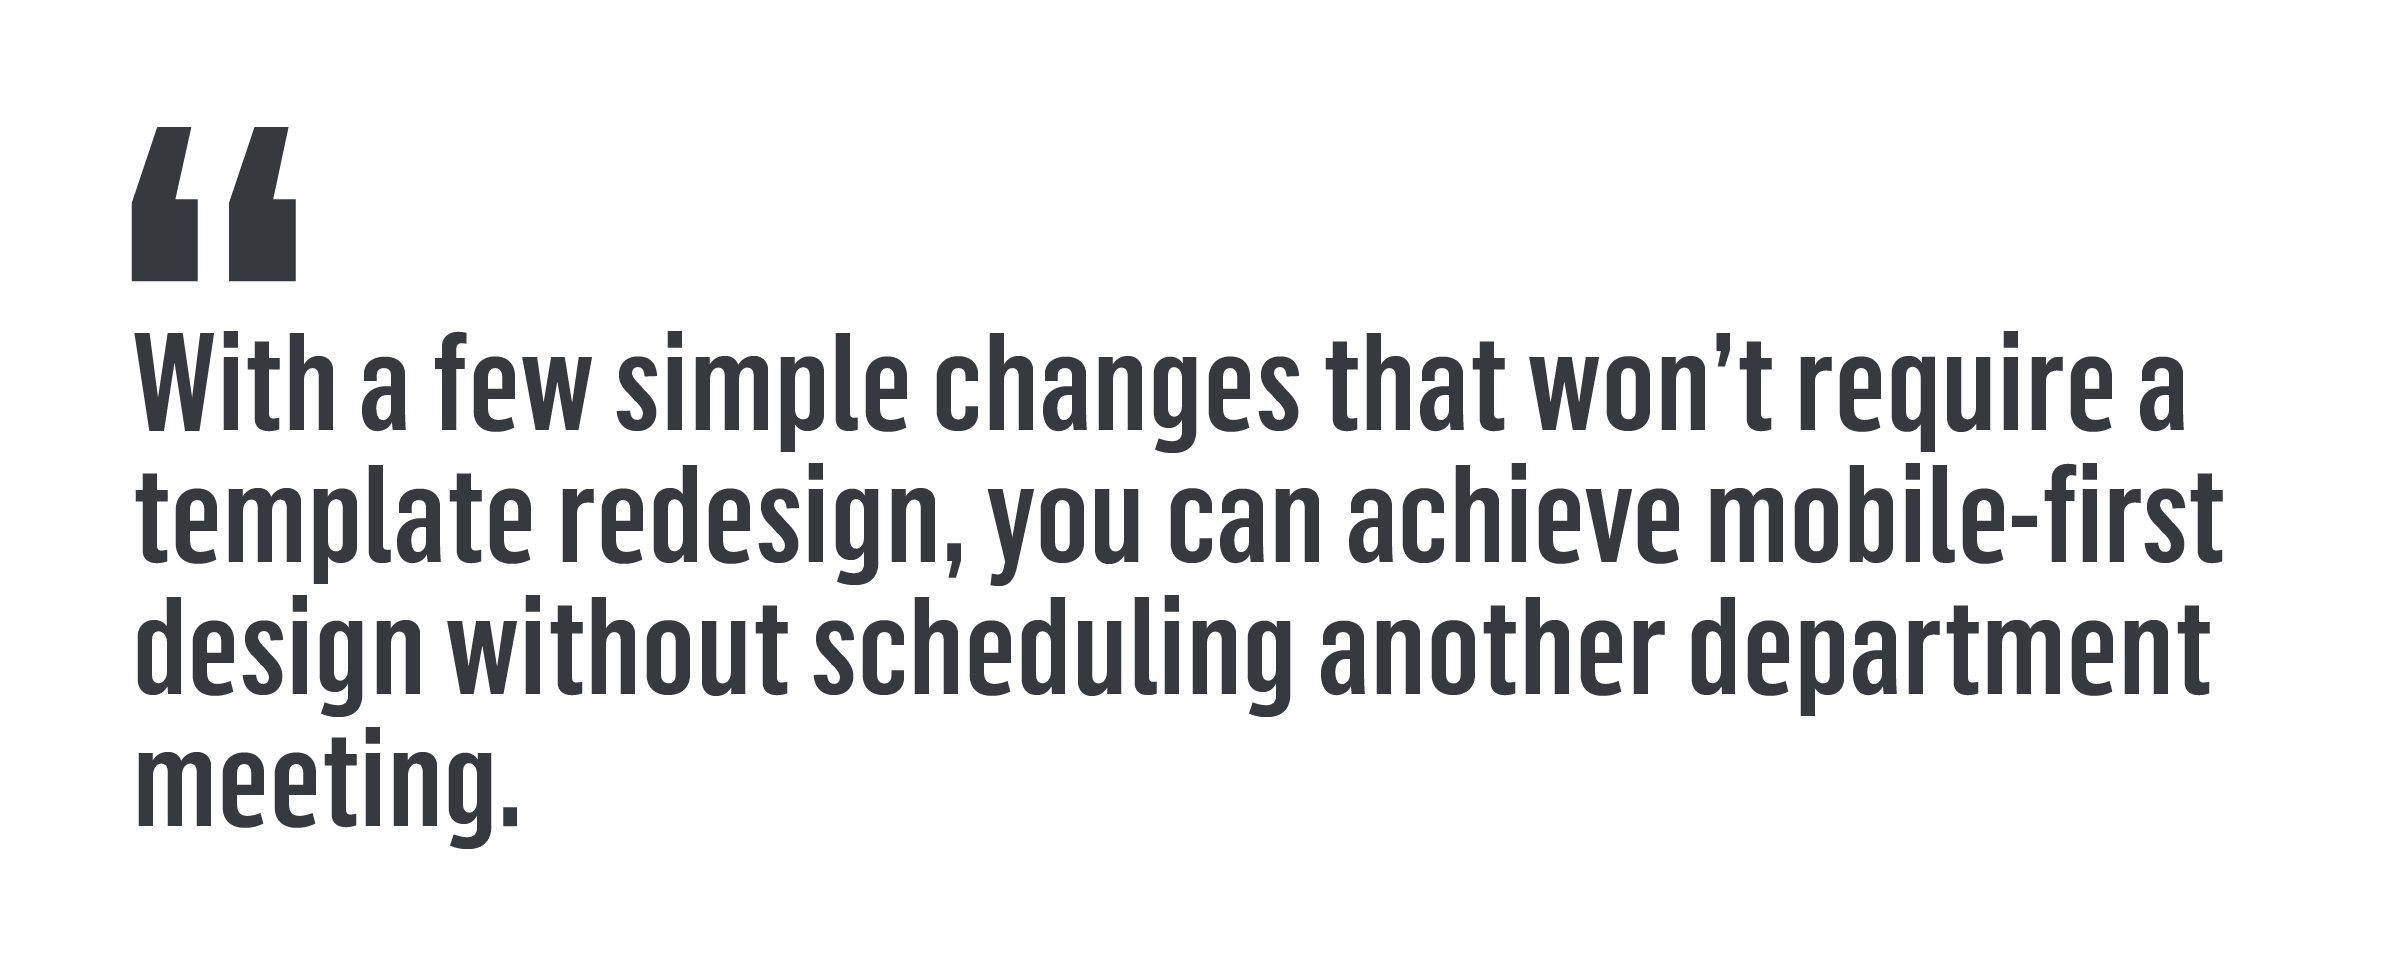 "With a few simple changes that won't require a template redesign, you can achieve mobile-first design without scheduling another department meeting."